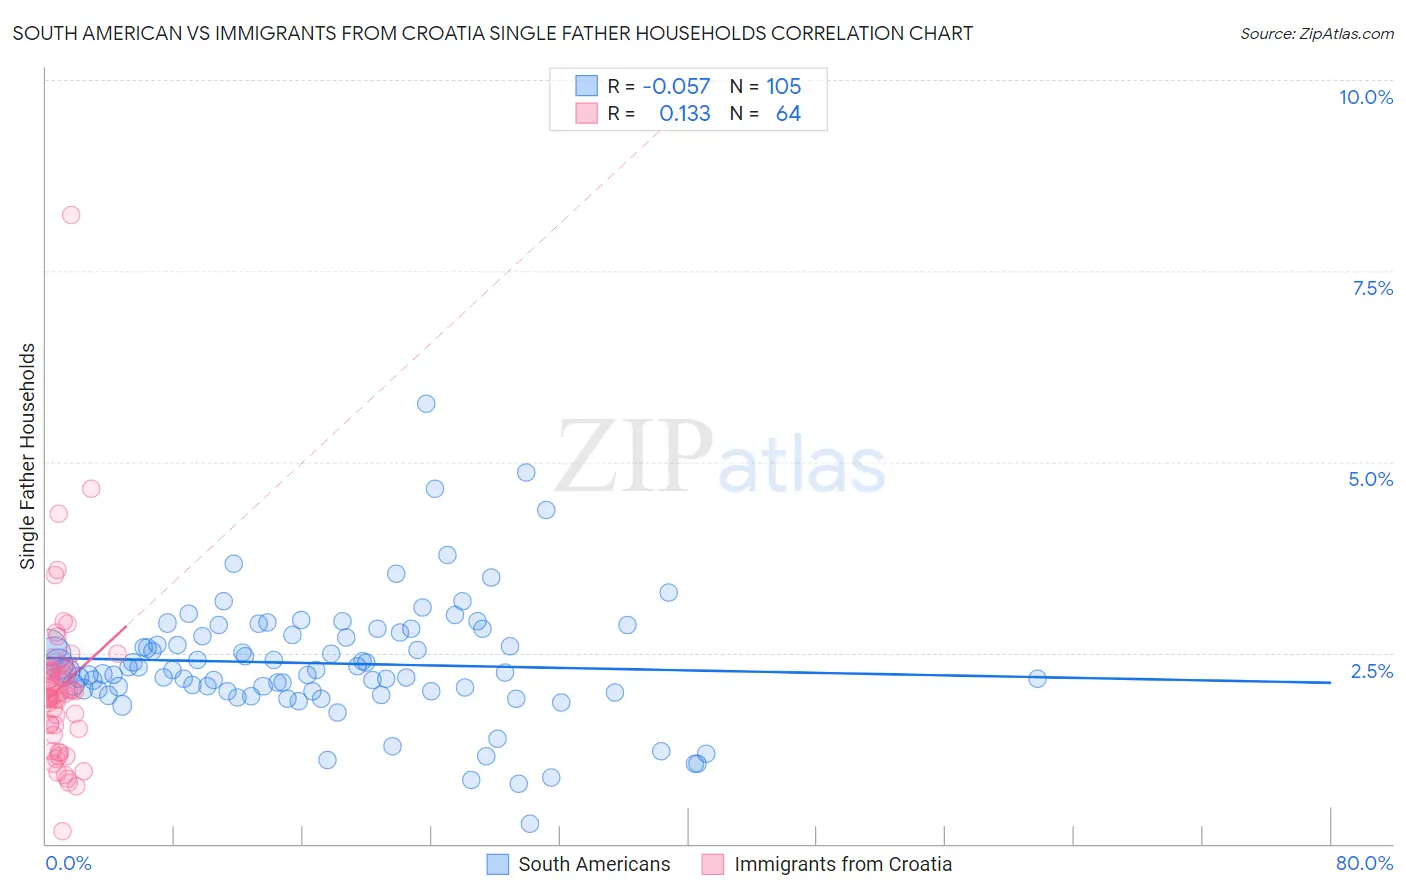 South American vs Immigrants from Croatia Single Father Households